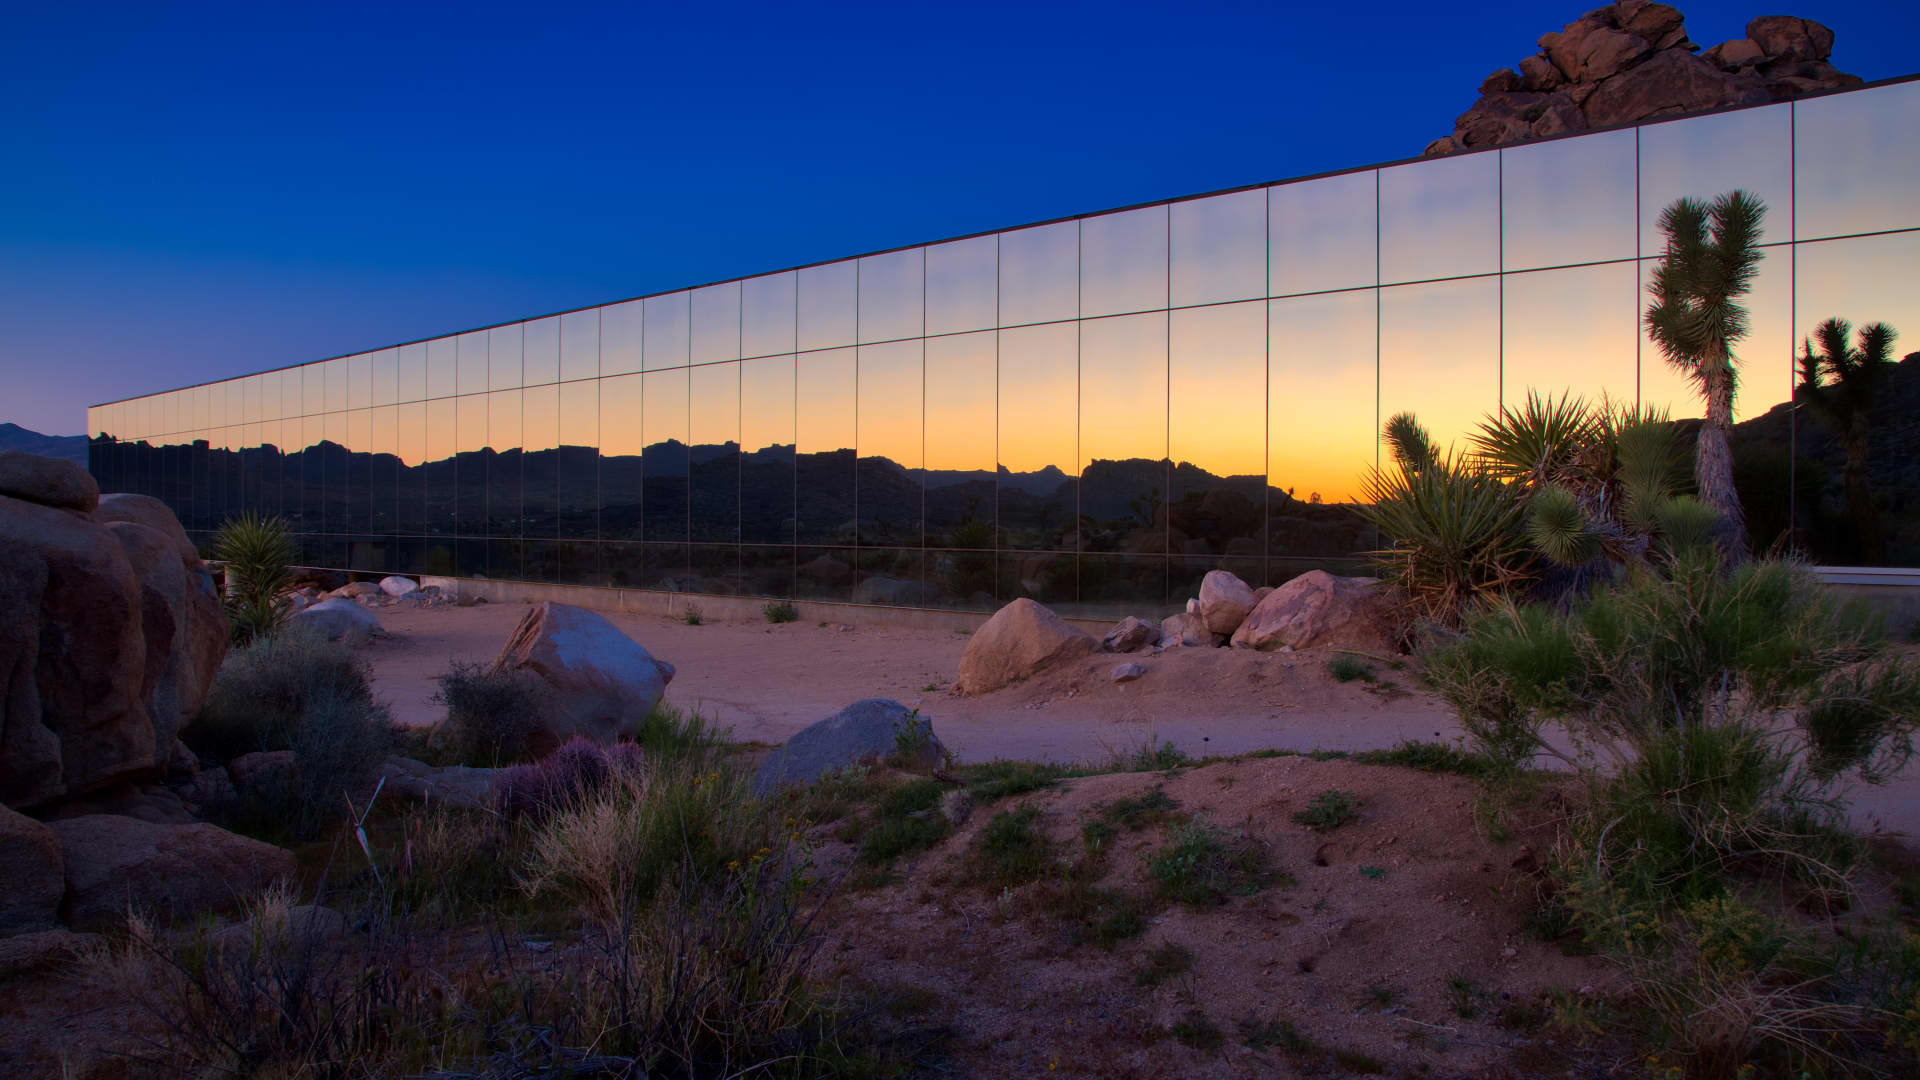 The Invisible House's mirrored facade reflecting the desert sunrise.